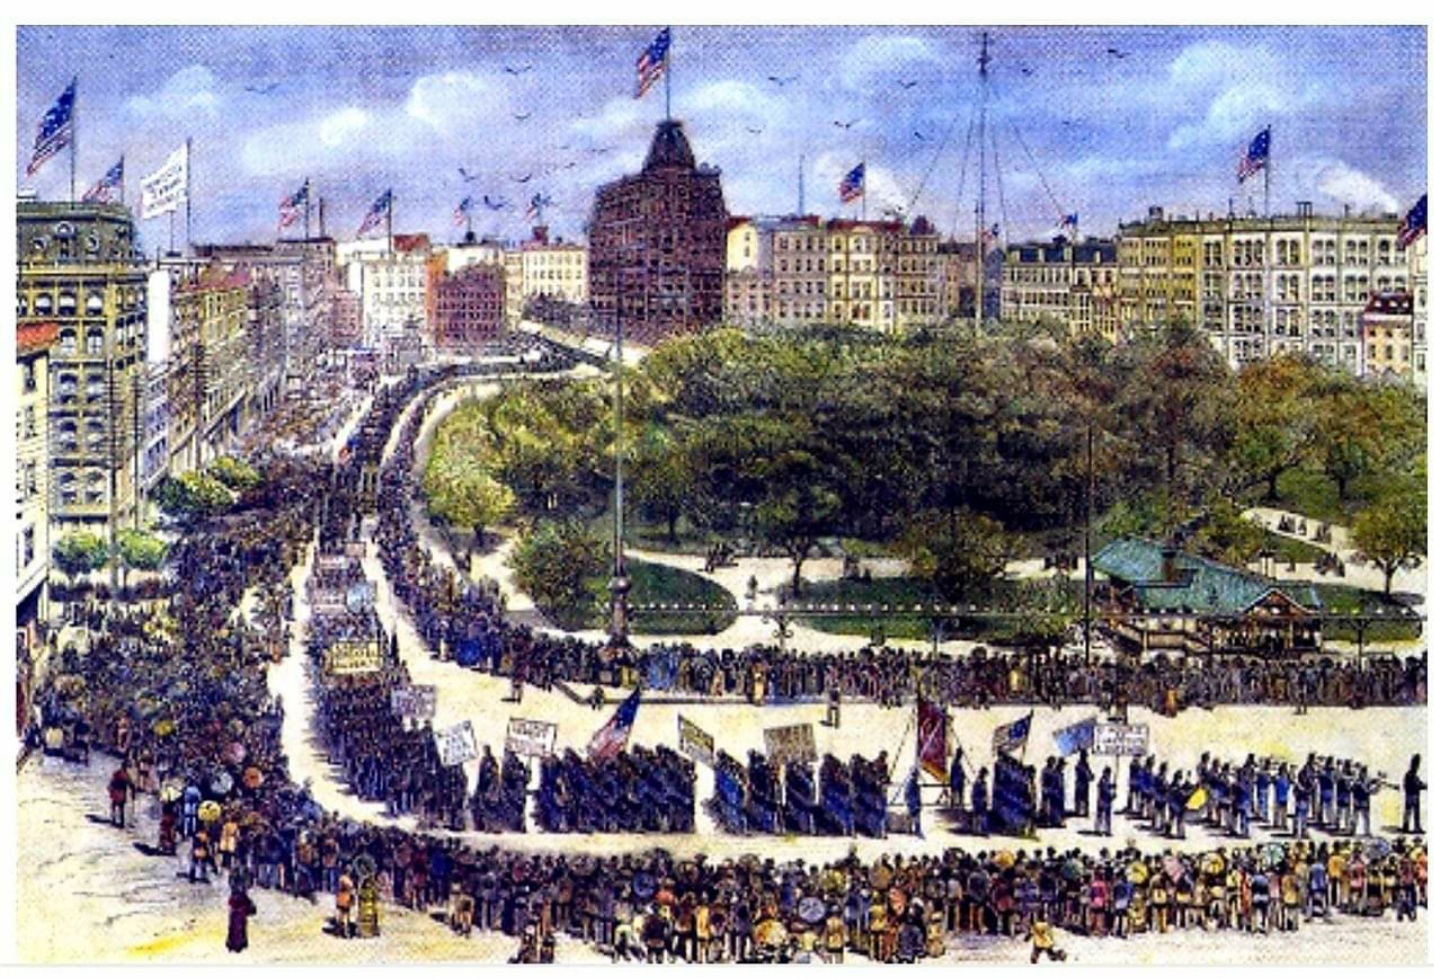 The NY workers' march of September 5, 1882